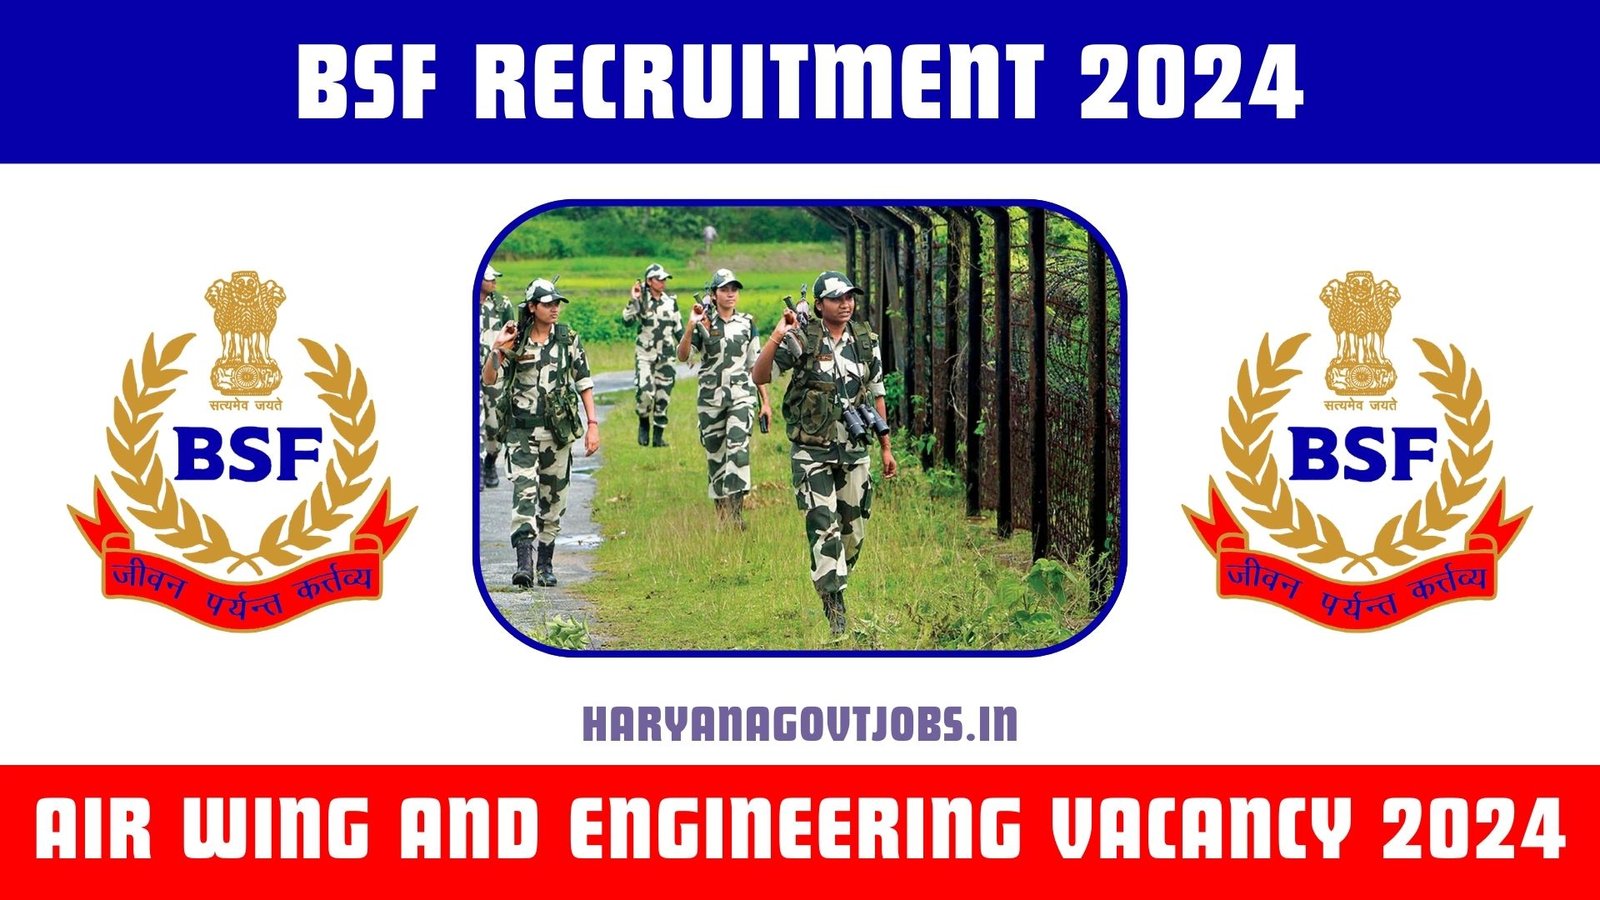 BSF Air Wing and Engineering Vacancy 2024 Overview